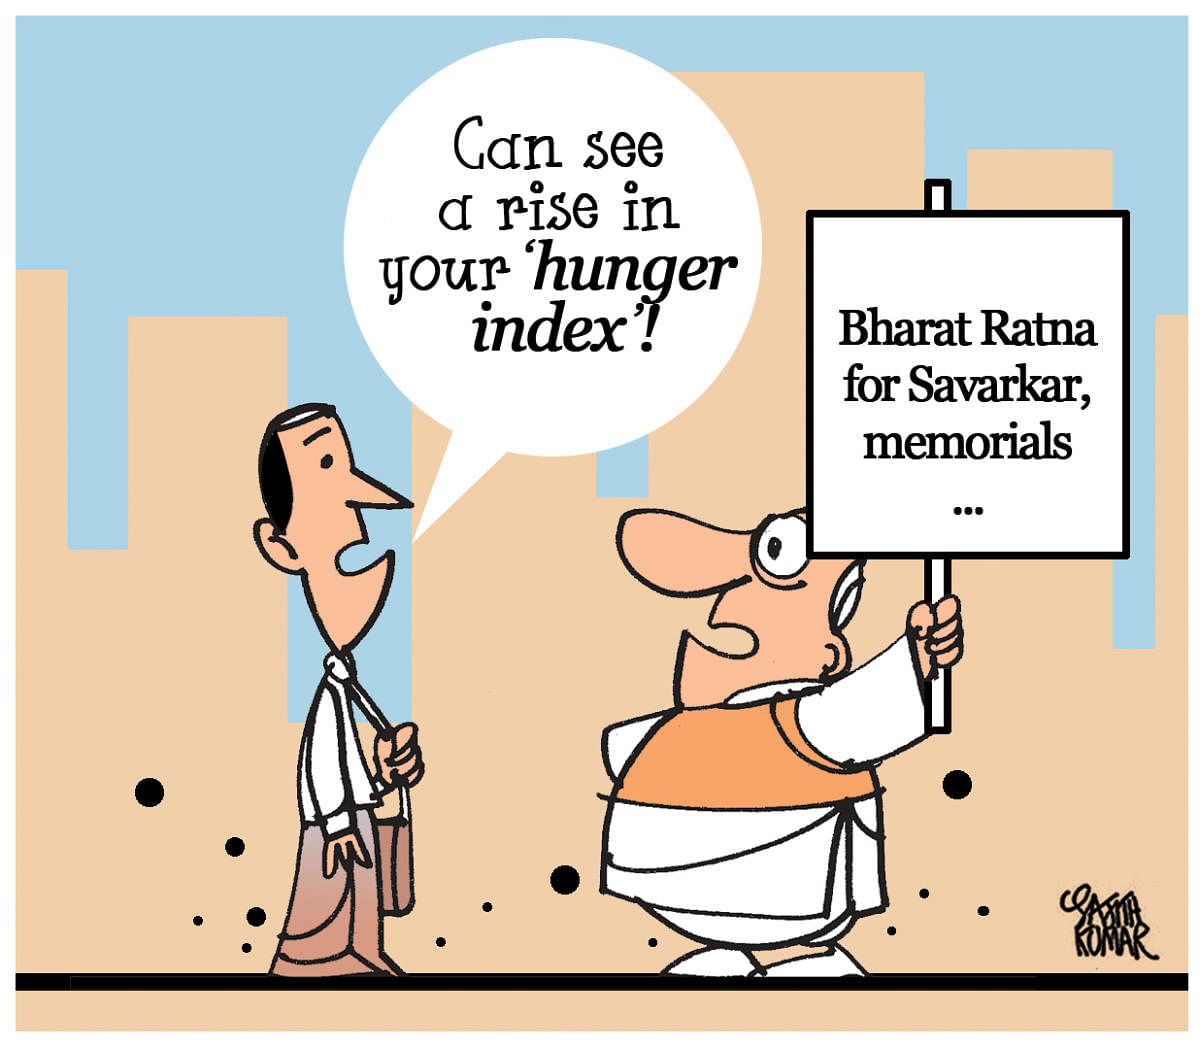 DH Toon | Bharat Ratna proposed for Savarkar by BJP